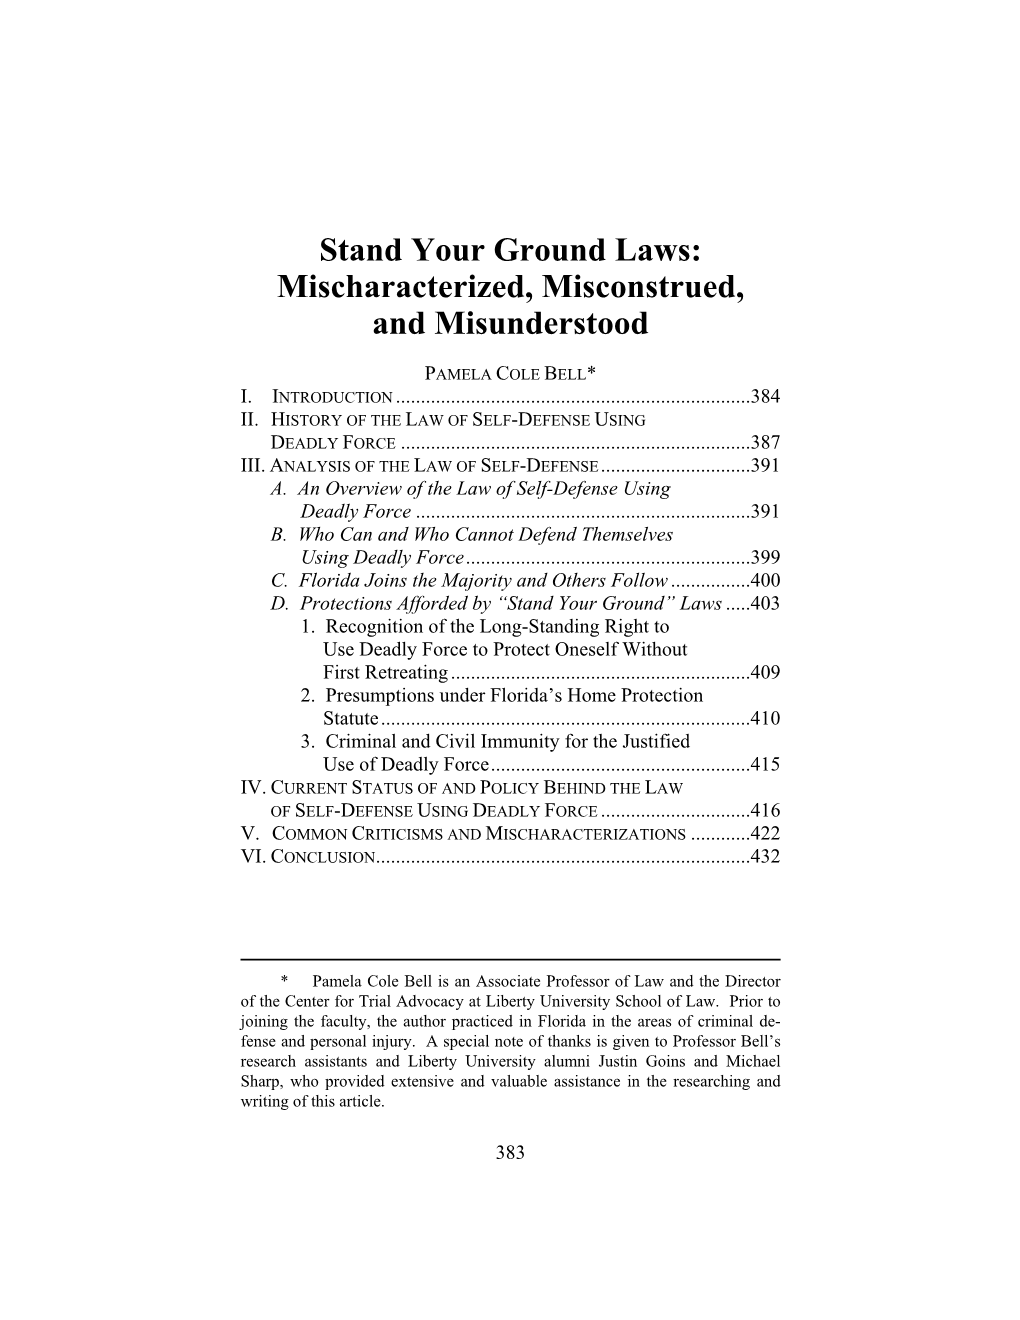 Stand Your Ground Laws: Mischaracterized, Misconstrued, and Misunderstood